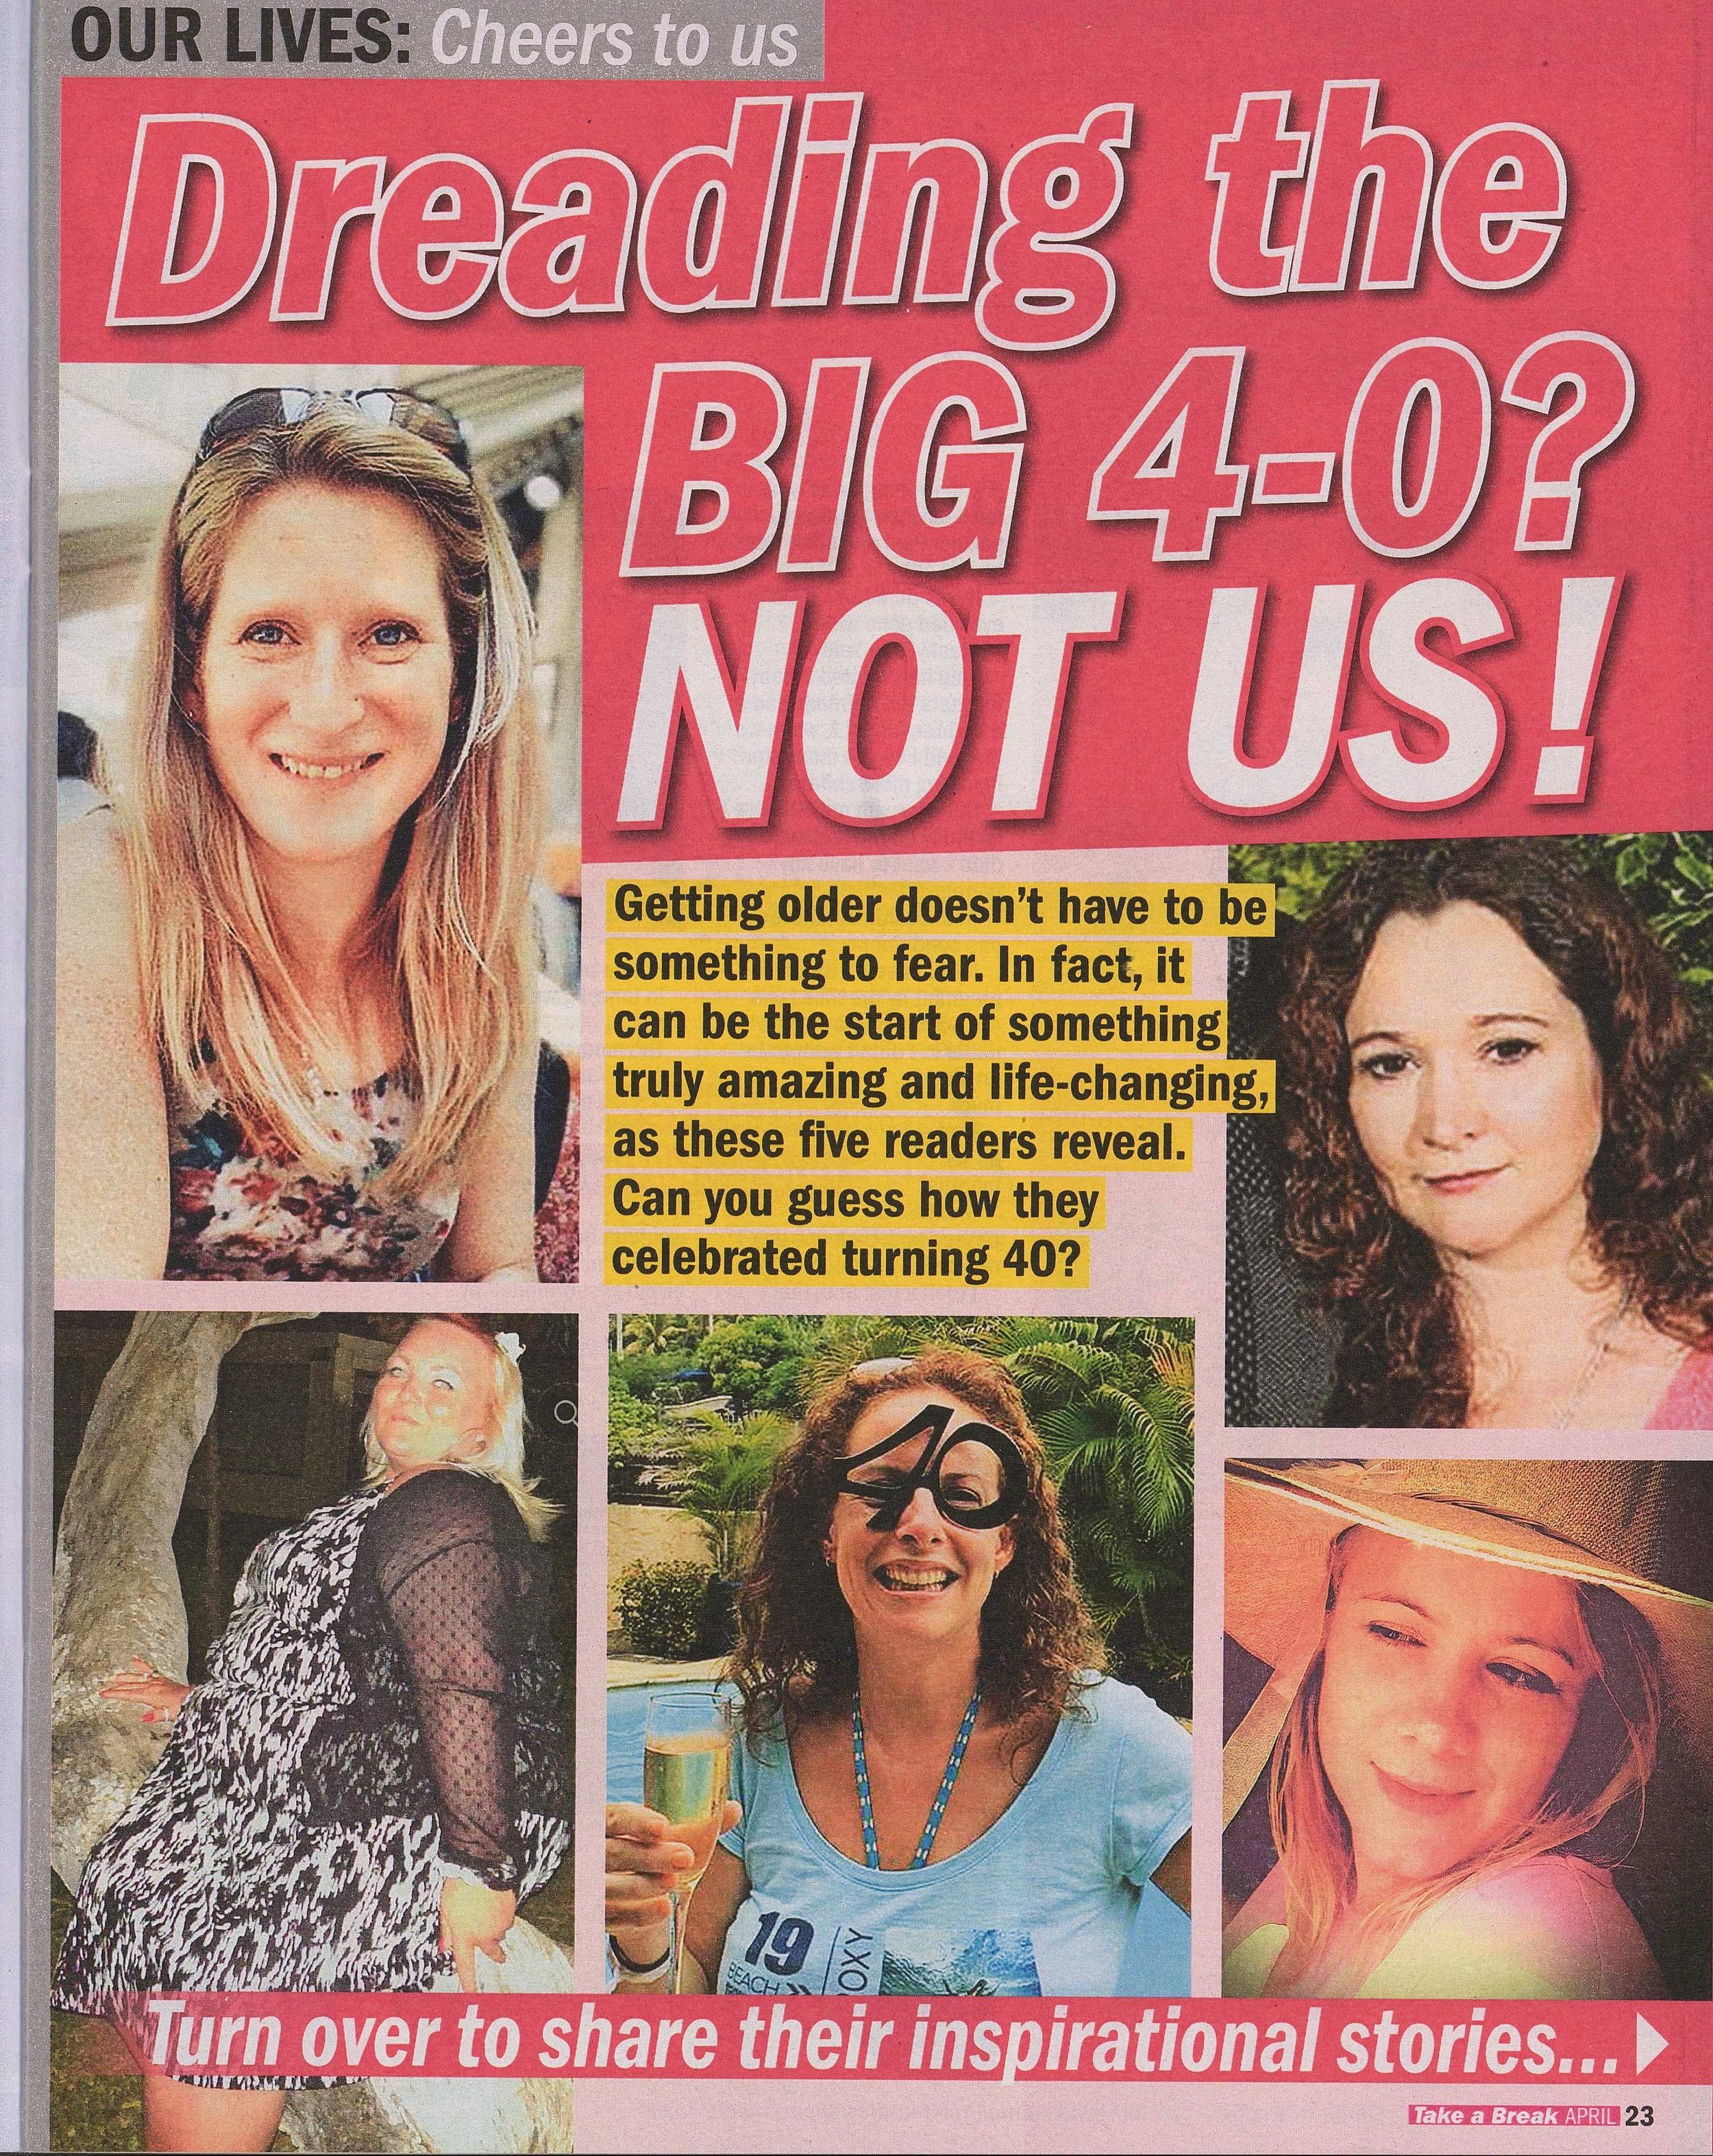 TaB_LifeAt40 spread page 1 headline Dreading the big 40 question mark not us